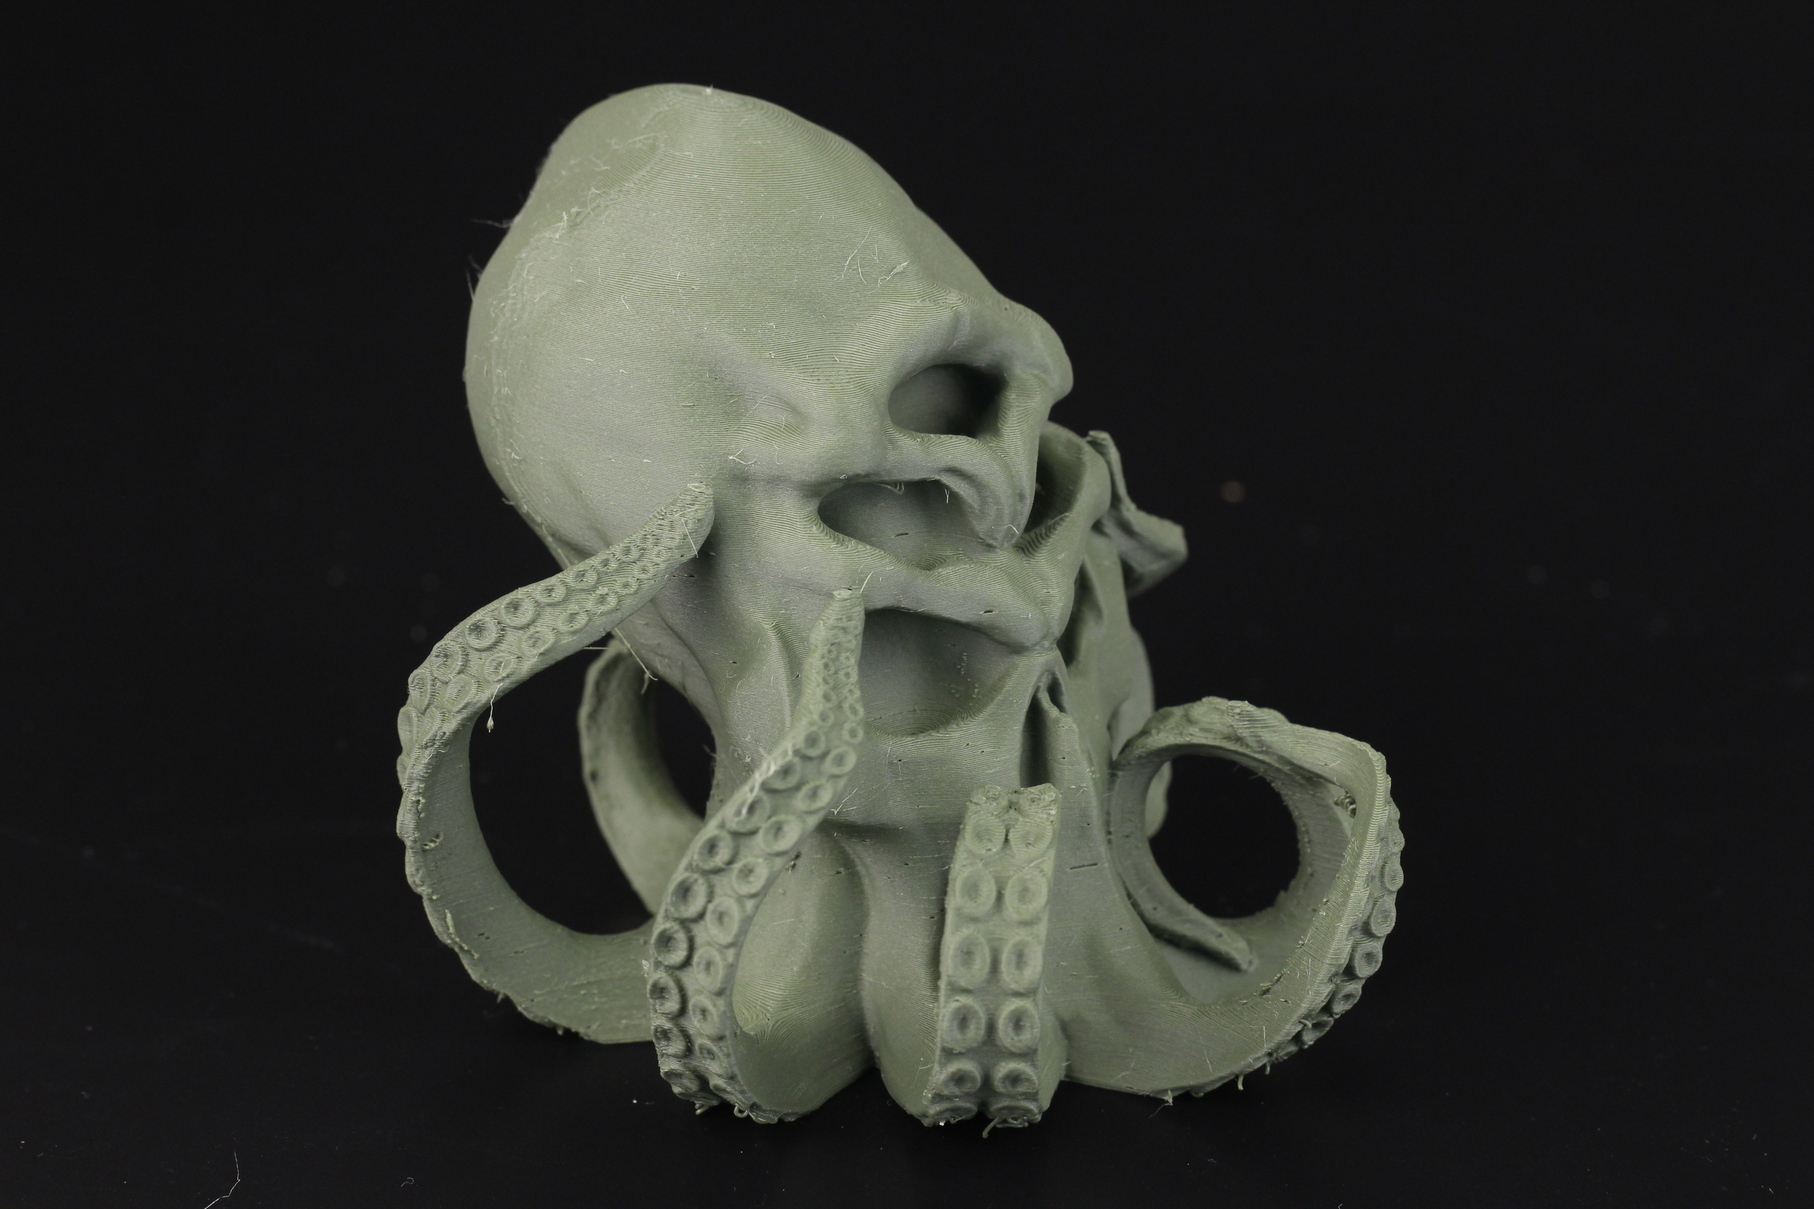 Cthulu printed on BIQU B1 SE PLUS 4 | BIQU B1 SE PLUS Review: SKR 2 and ABL from Factory